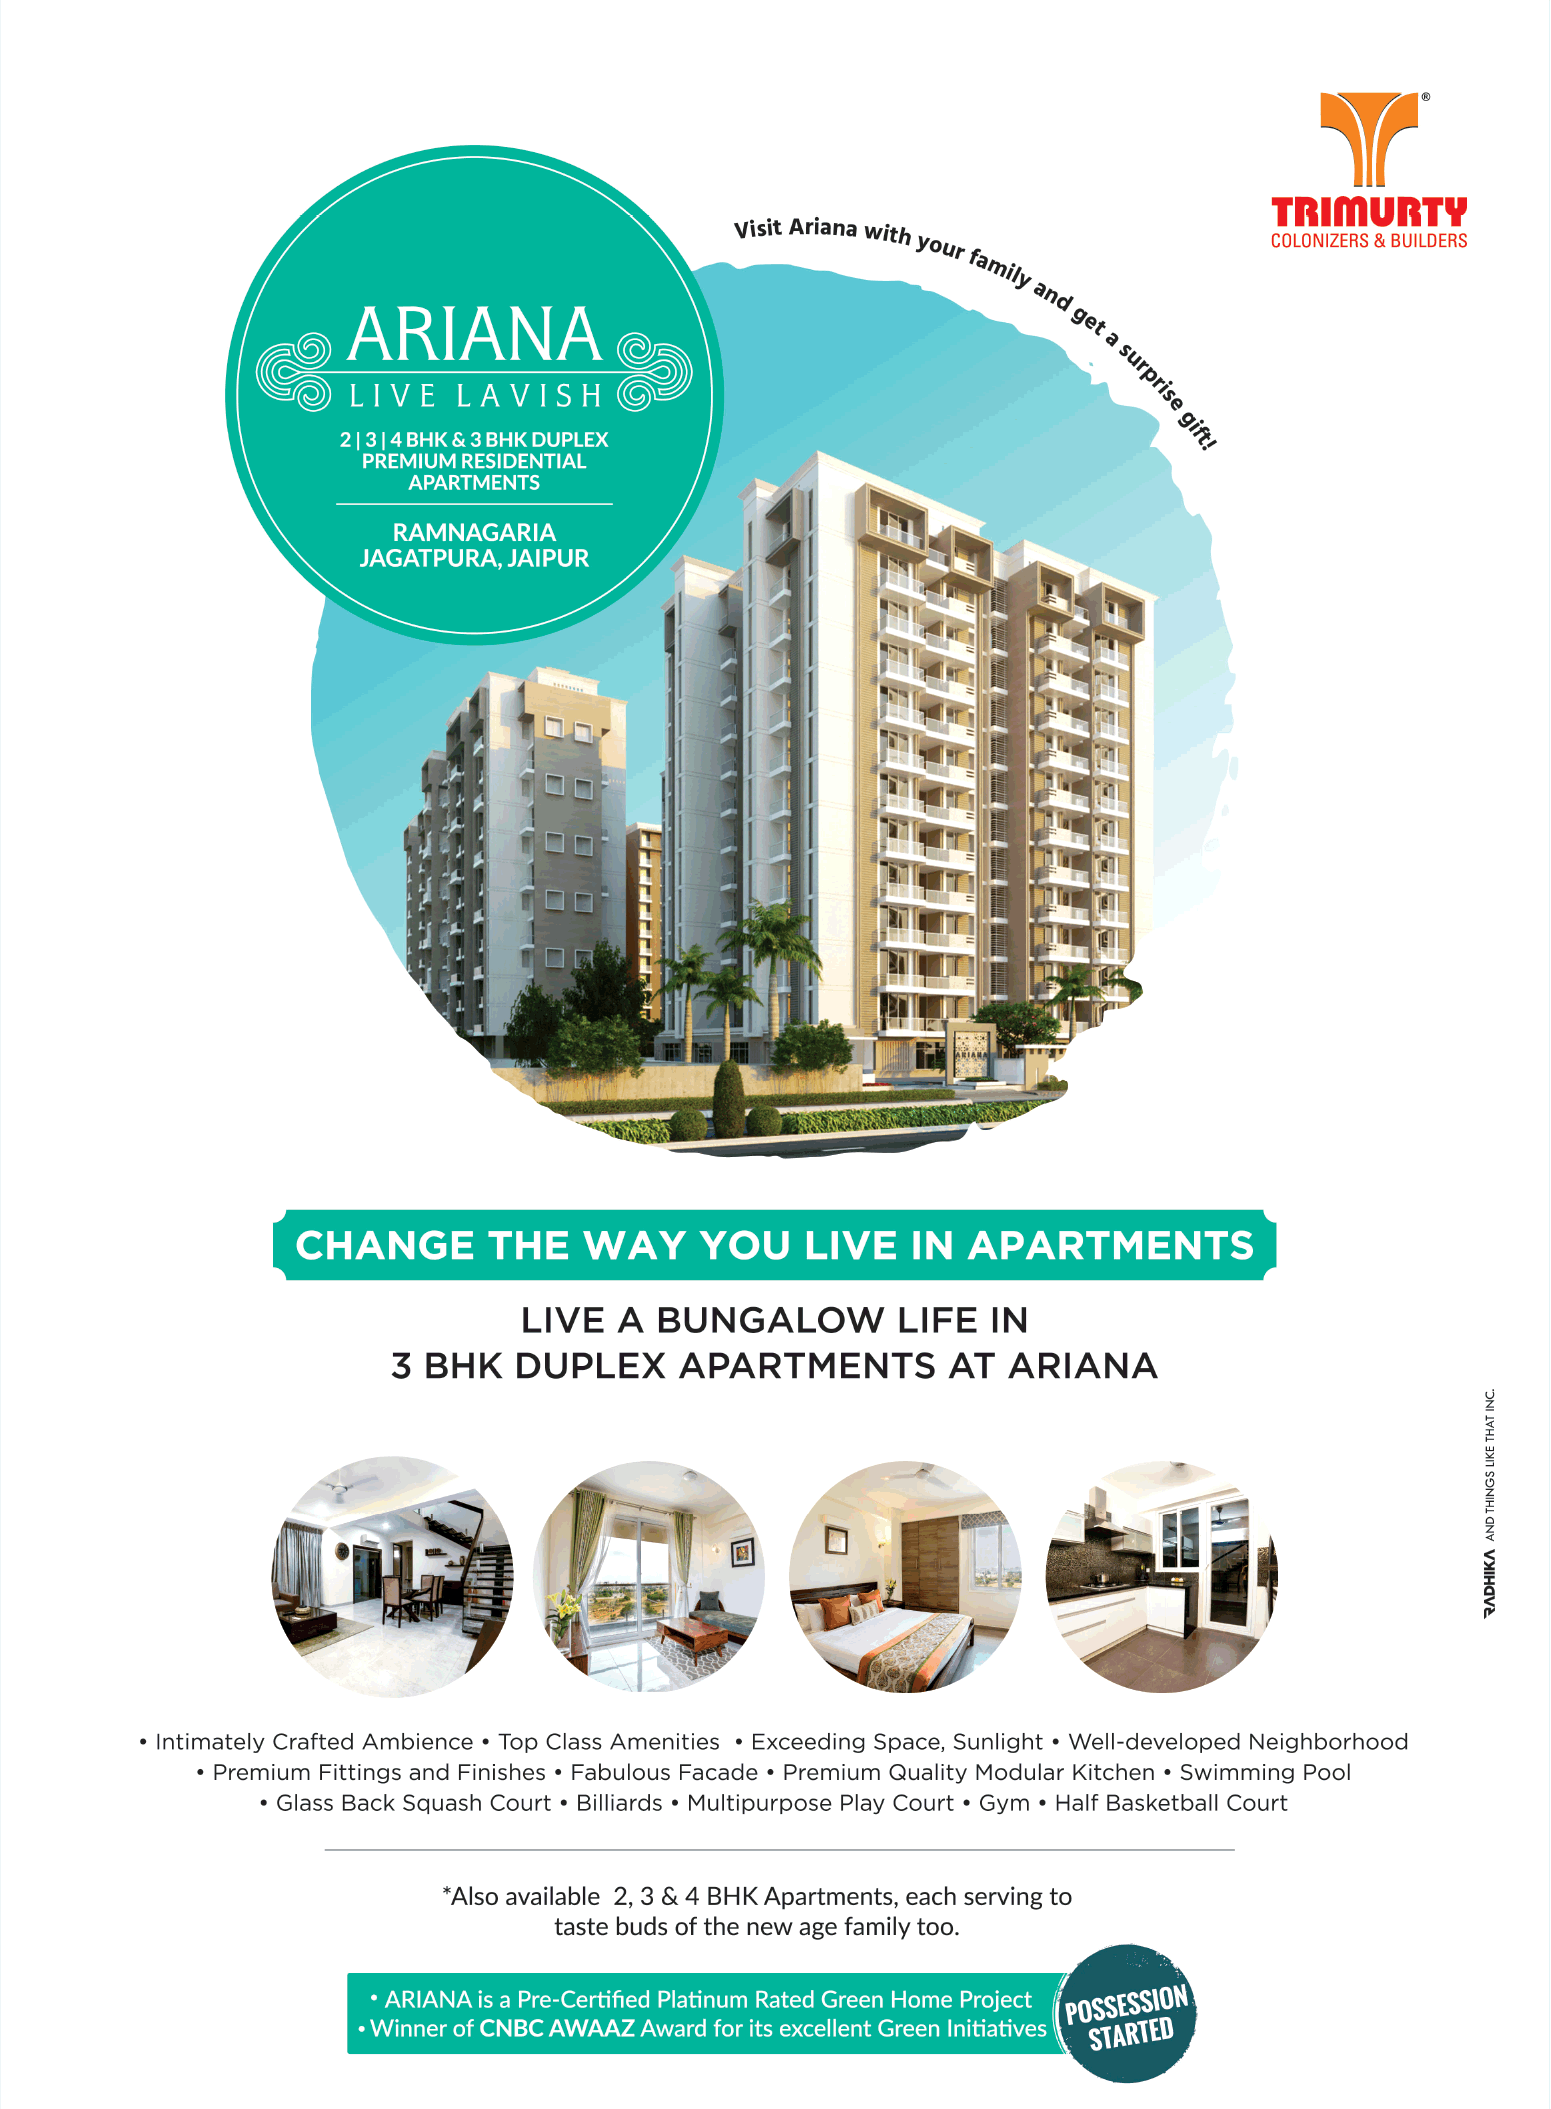 Live a bungalow life in 3 bhk duplex apartments at Trimurty Ariana in Jaipur Update